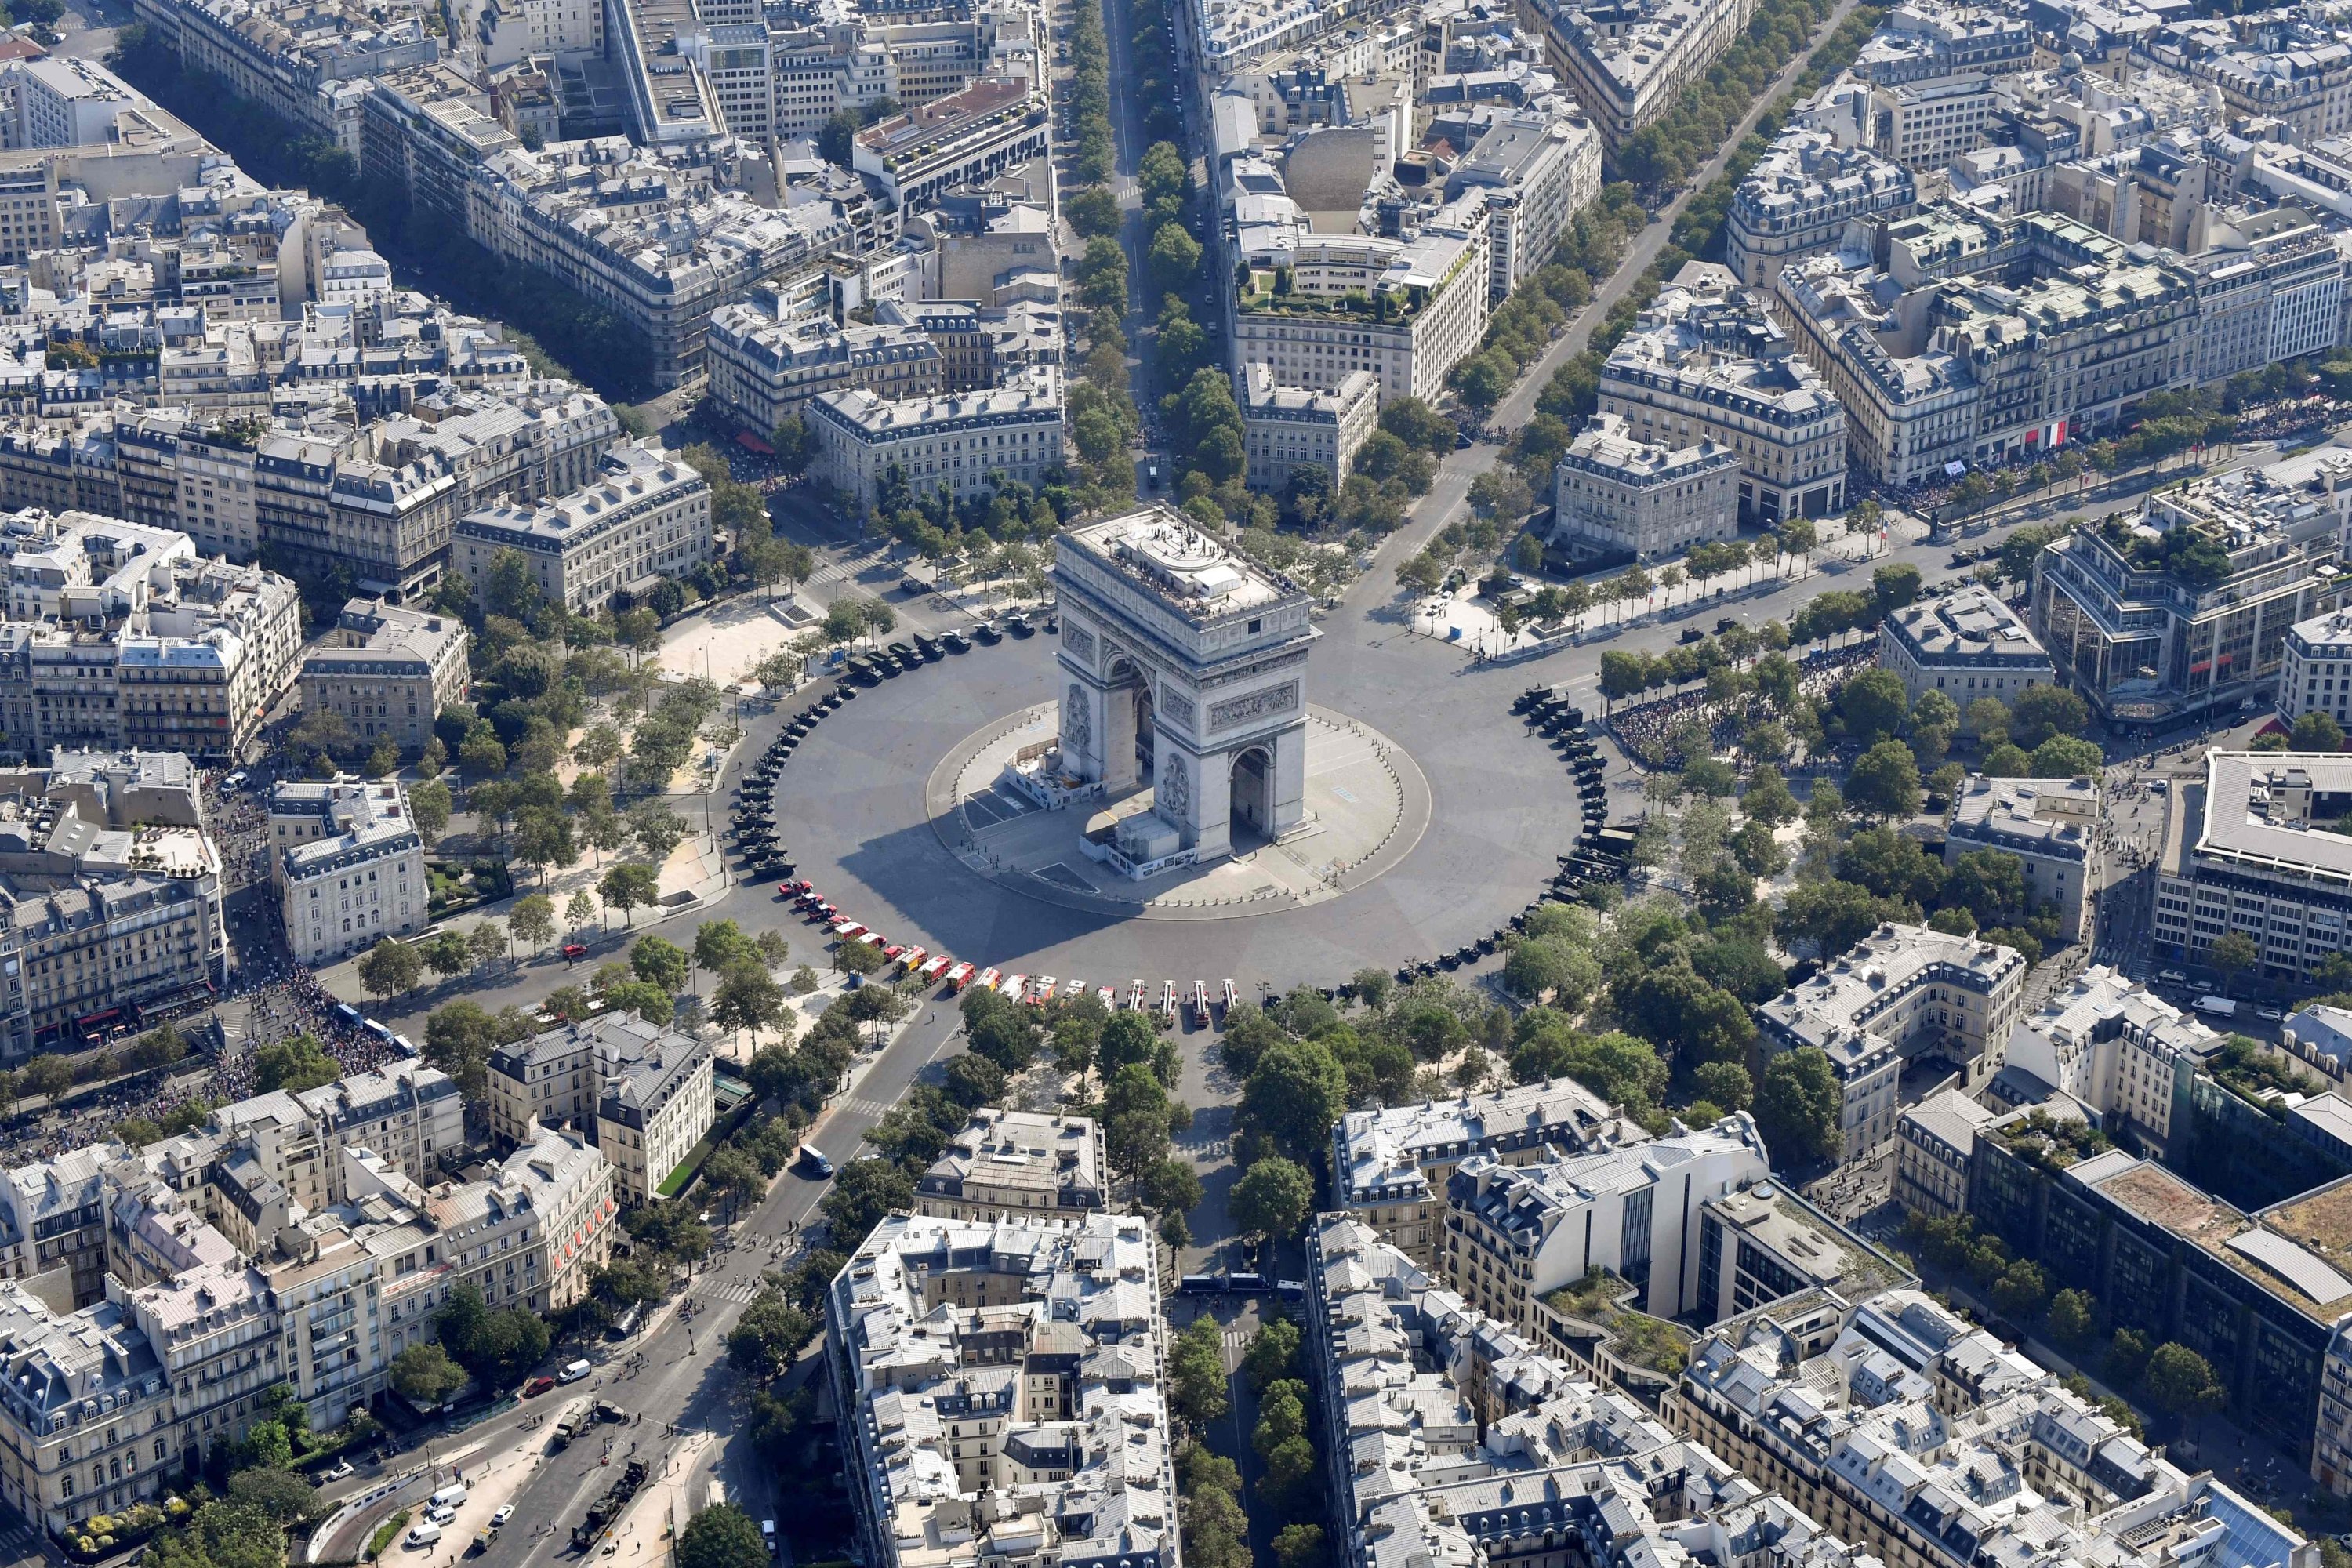 Paris to wrap Arc de Triomphe, as planned by Christo, in July | Daily Sabah